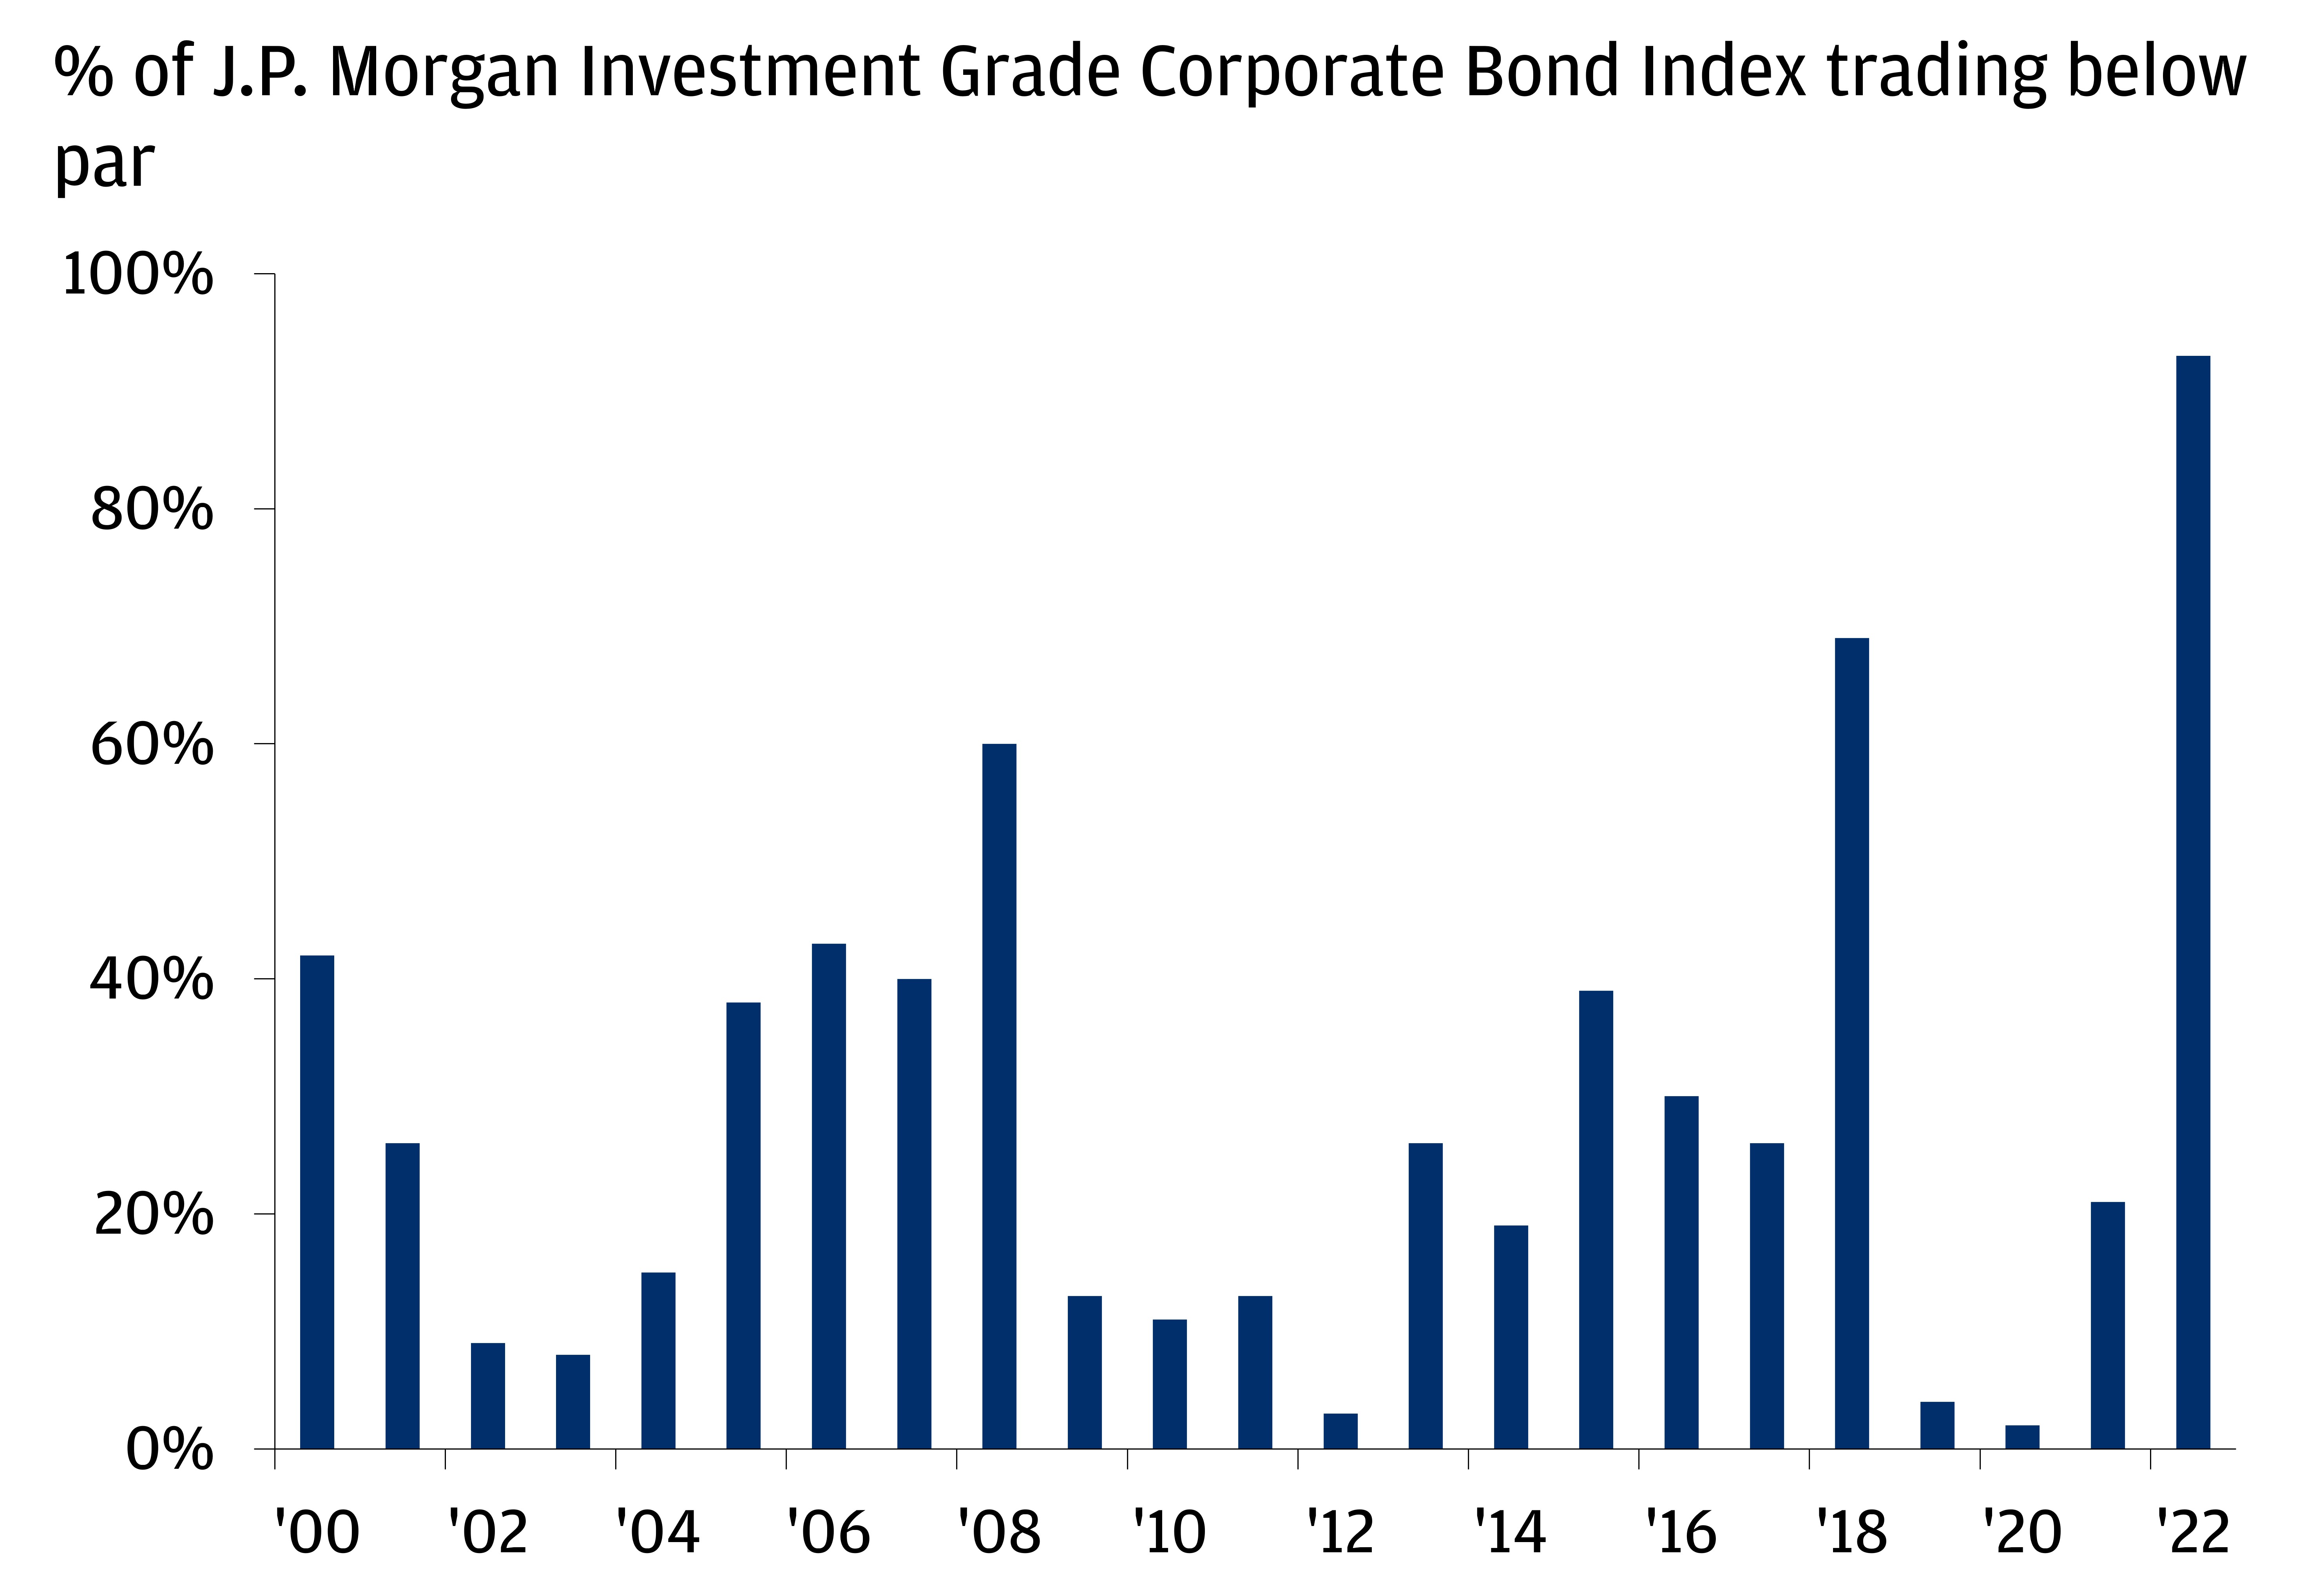 This chart shows the percentage of J.P. Morgan Investment Grade Bond Index constituents trading below par value per year since 2000.